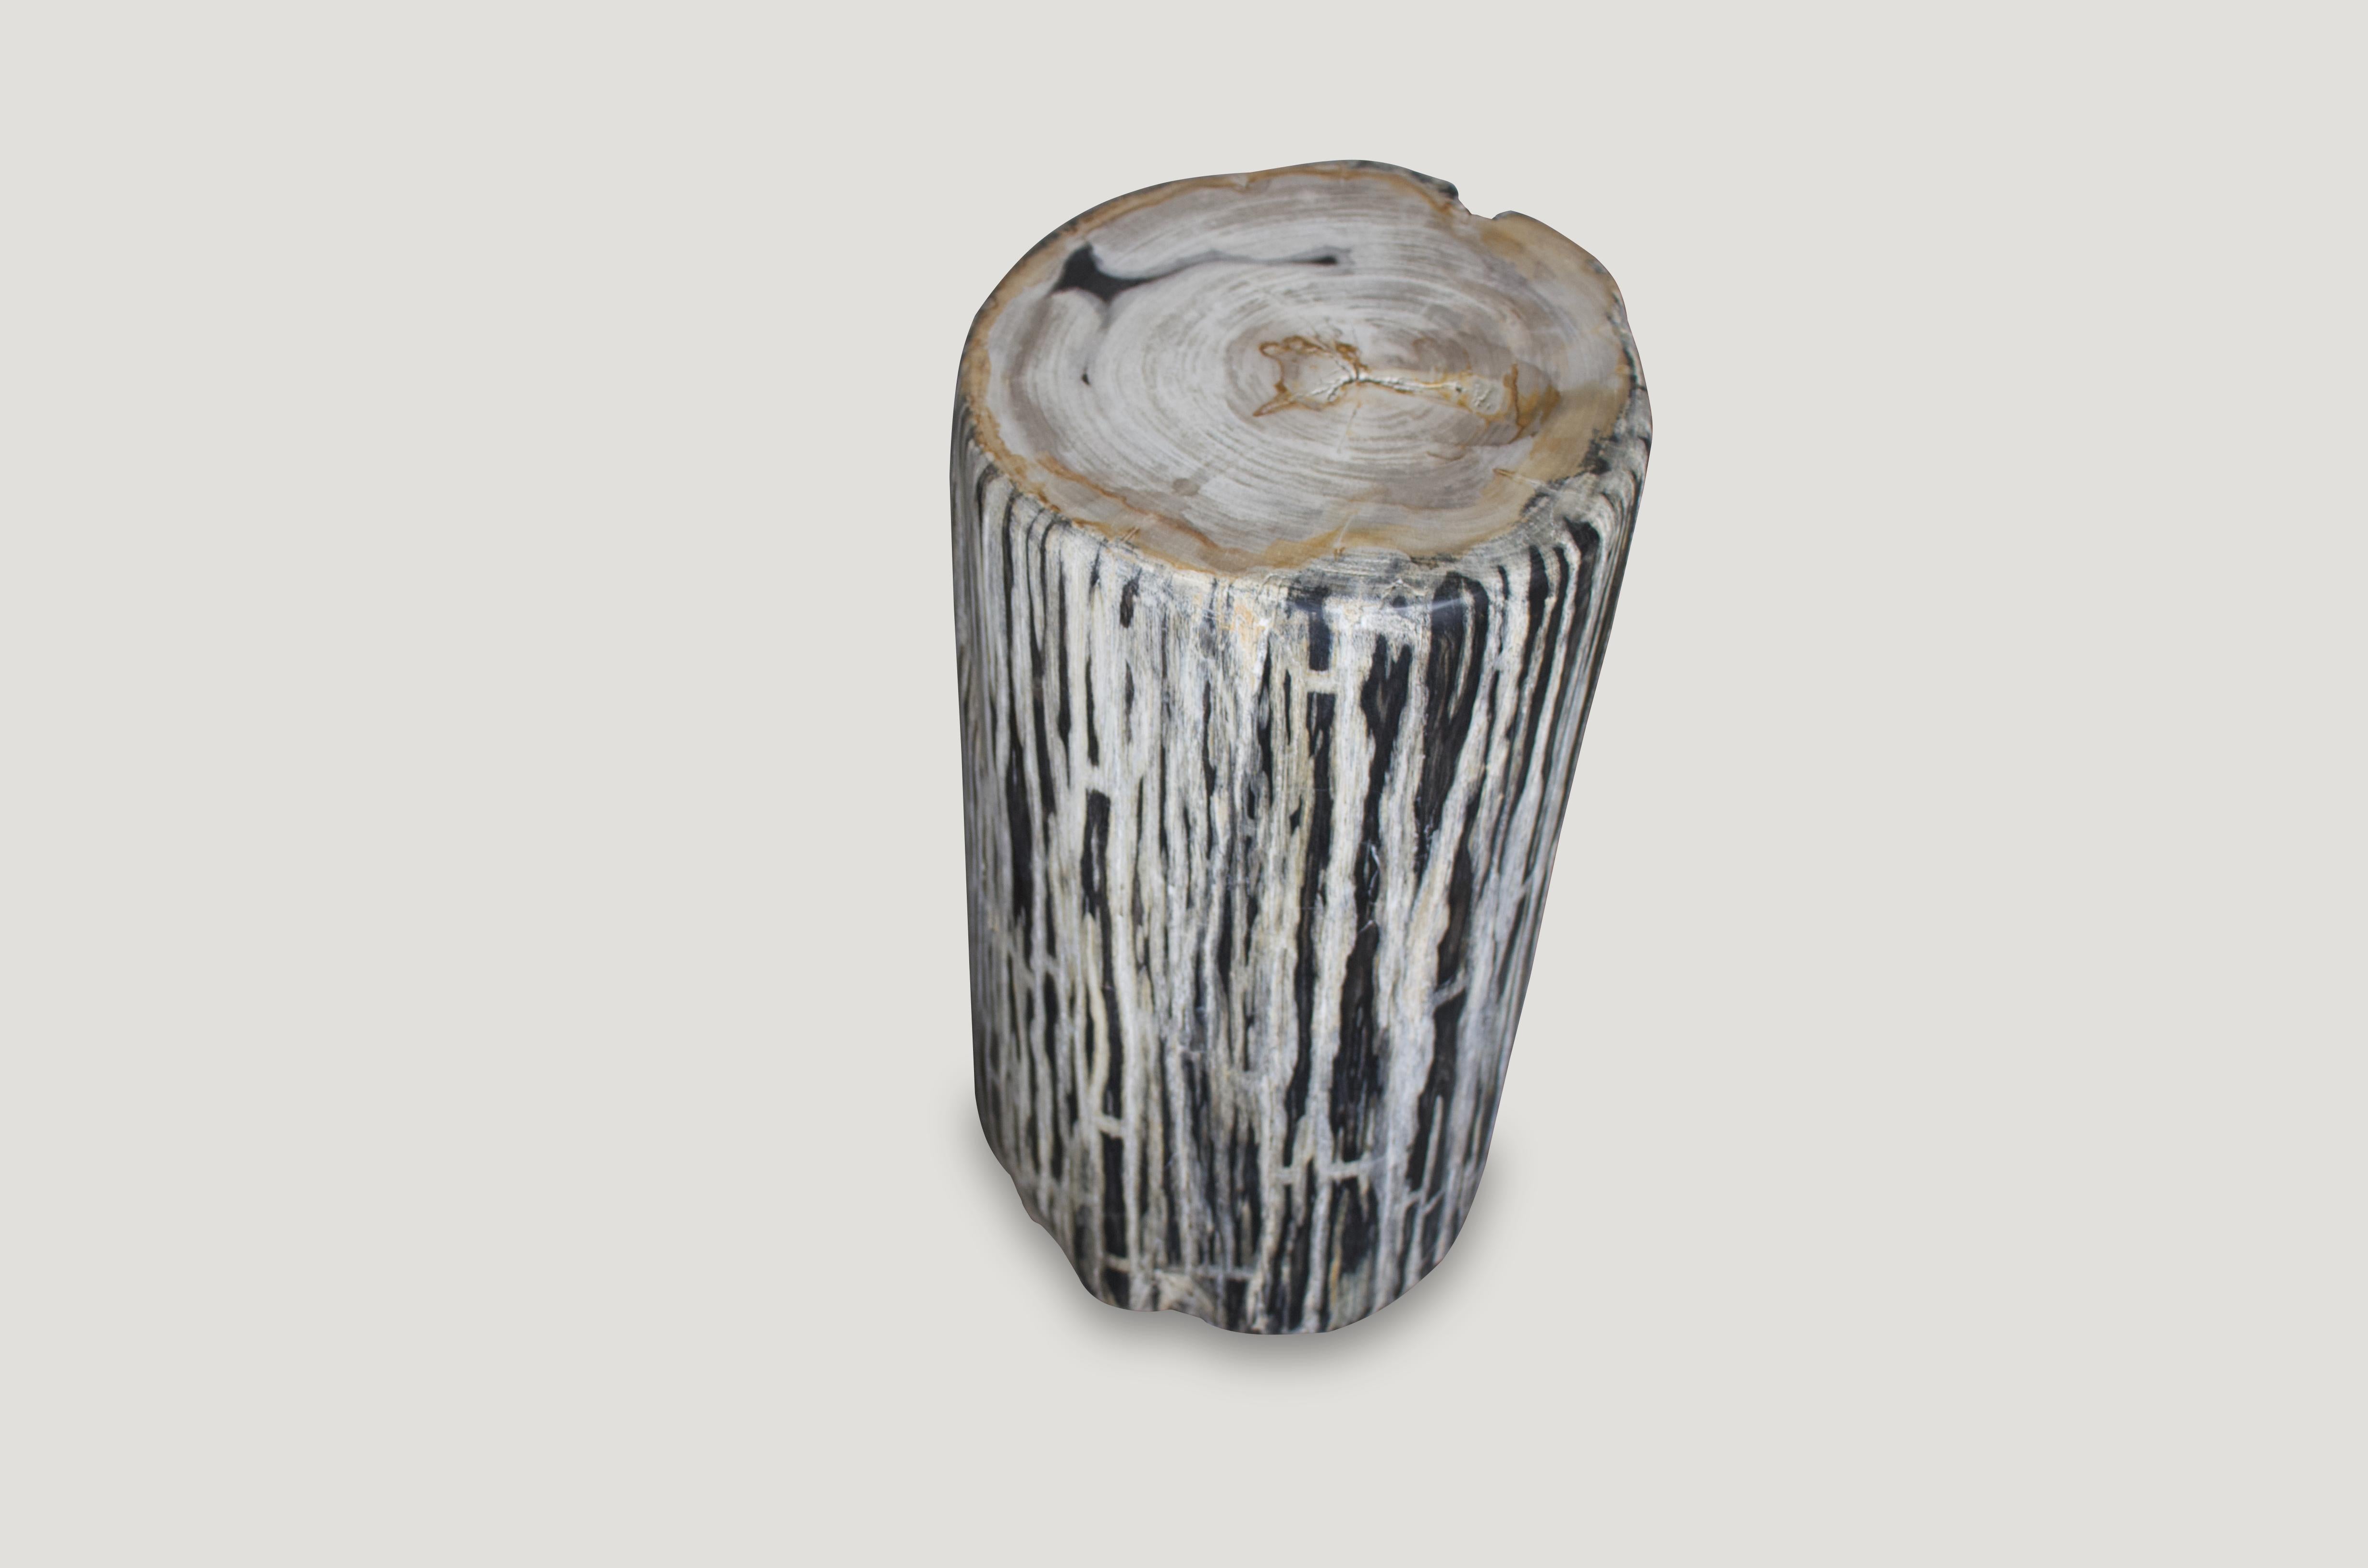 We have a fabulous collection of these black and white, hard to find, high quality petrified wood side tables, all cut from the same petrified log. The price reflects the one shown.

As with a diamond, we polish the highest quality fossilized